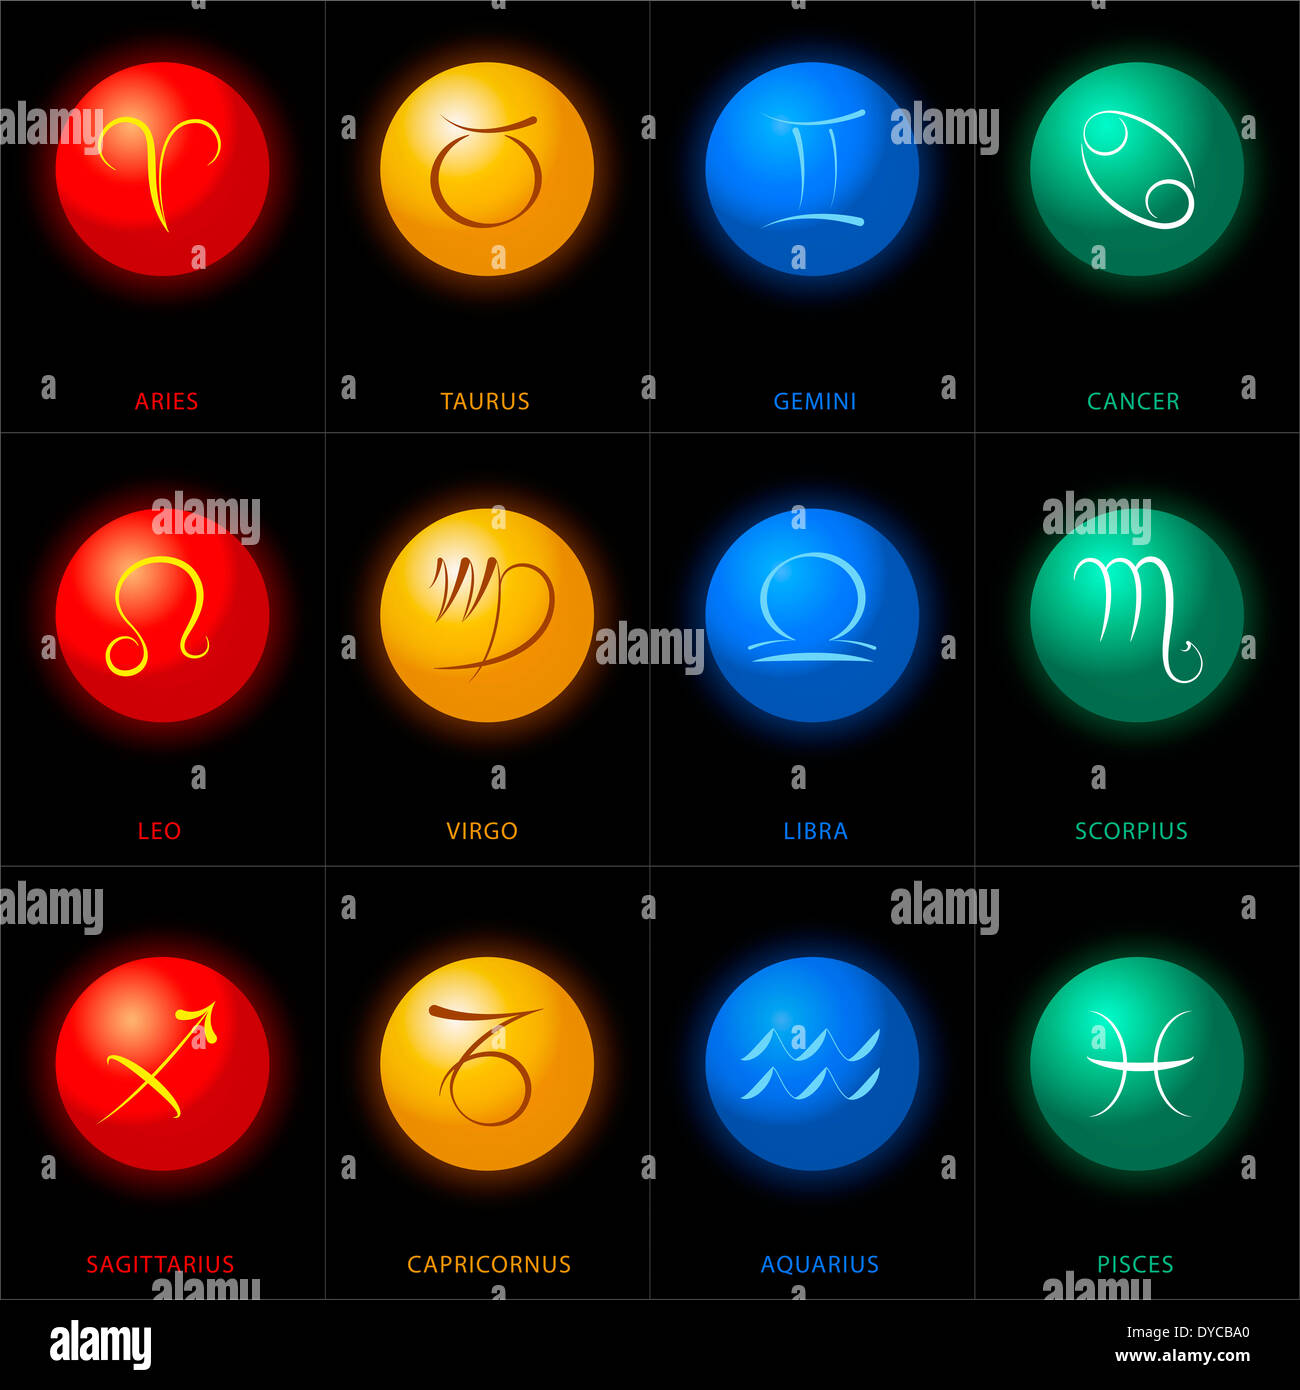 Astrology illustrations of the twelve zodiac signs in colored spheres. Stock Photo